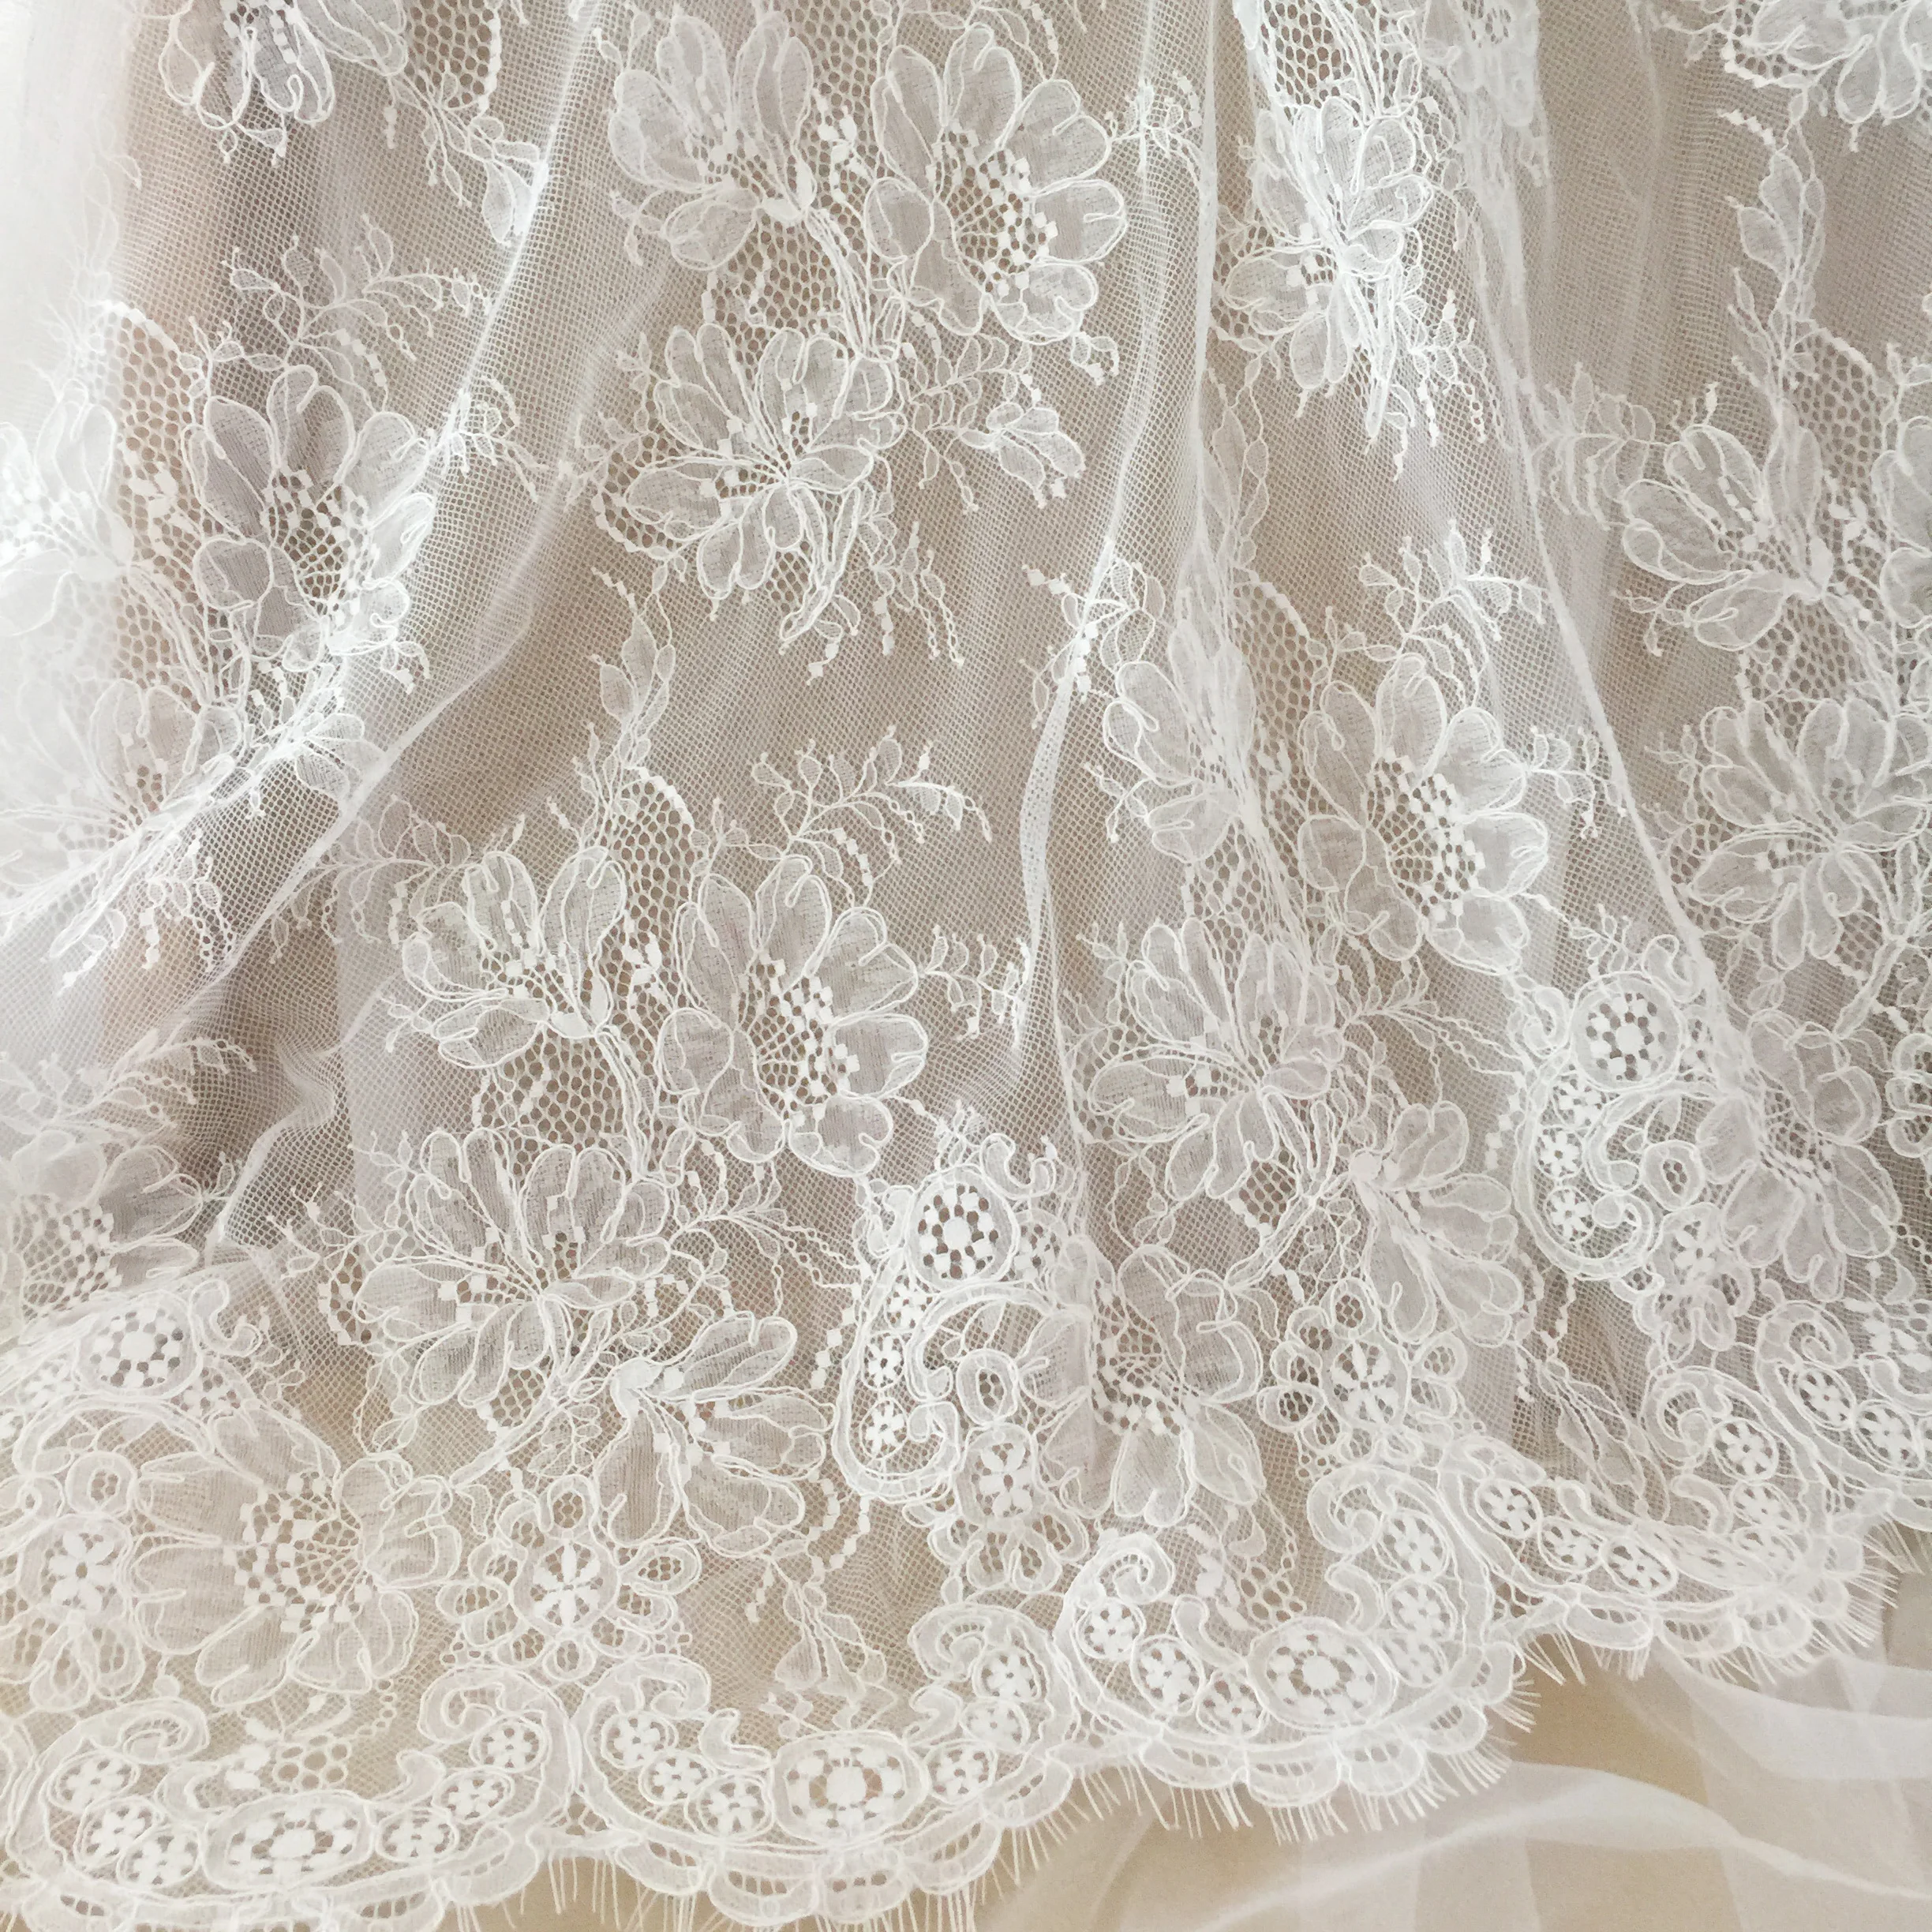 3 Yards French Made Fine Geometric Couture Alencon Embroidery Lace Fabric at 150cm wide, Couture Wedding Gown Fabric